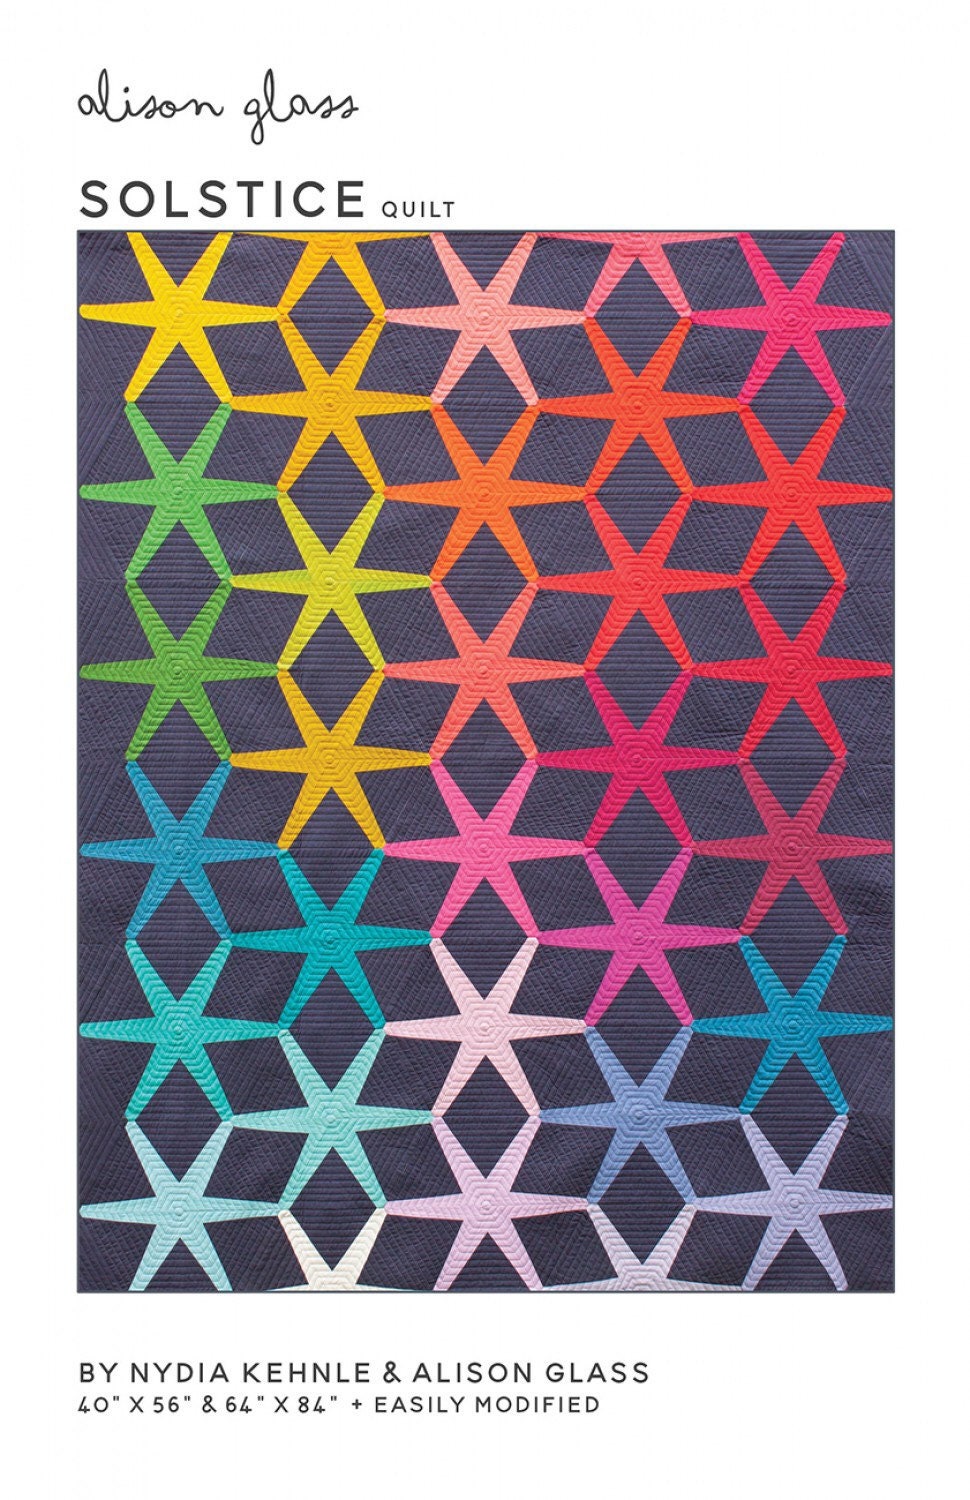 Solstice Quilt Pattern - Alison Glass - Nydia Kehnle - Foundation Paper Piecing